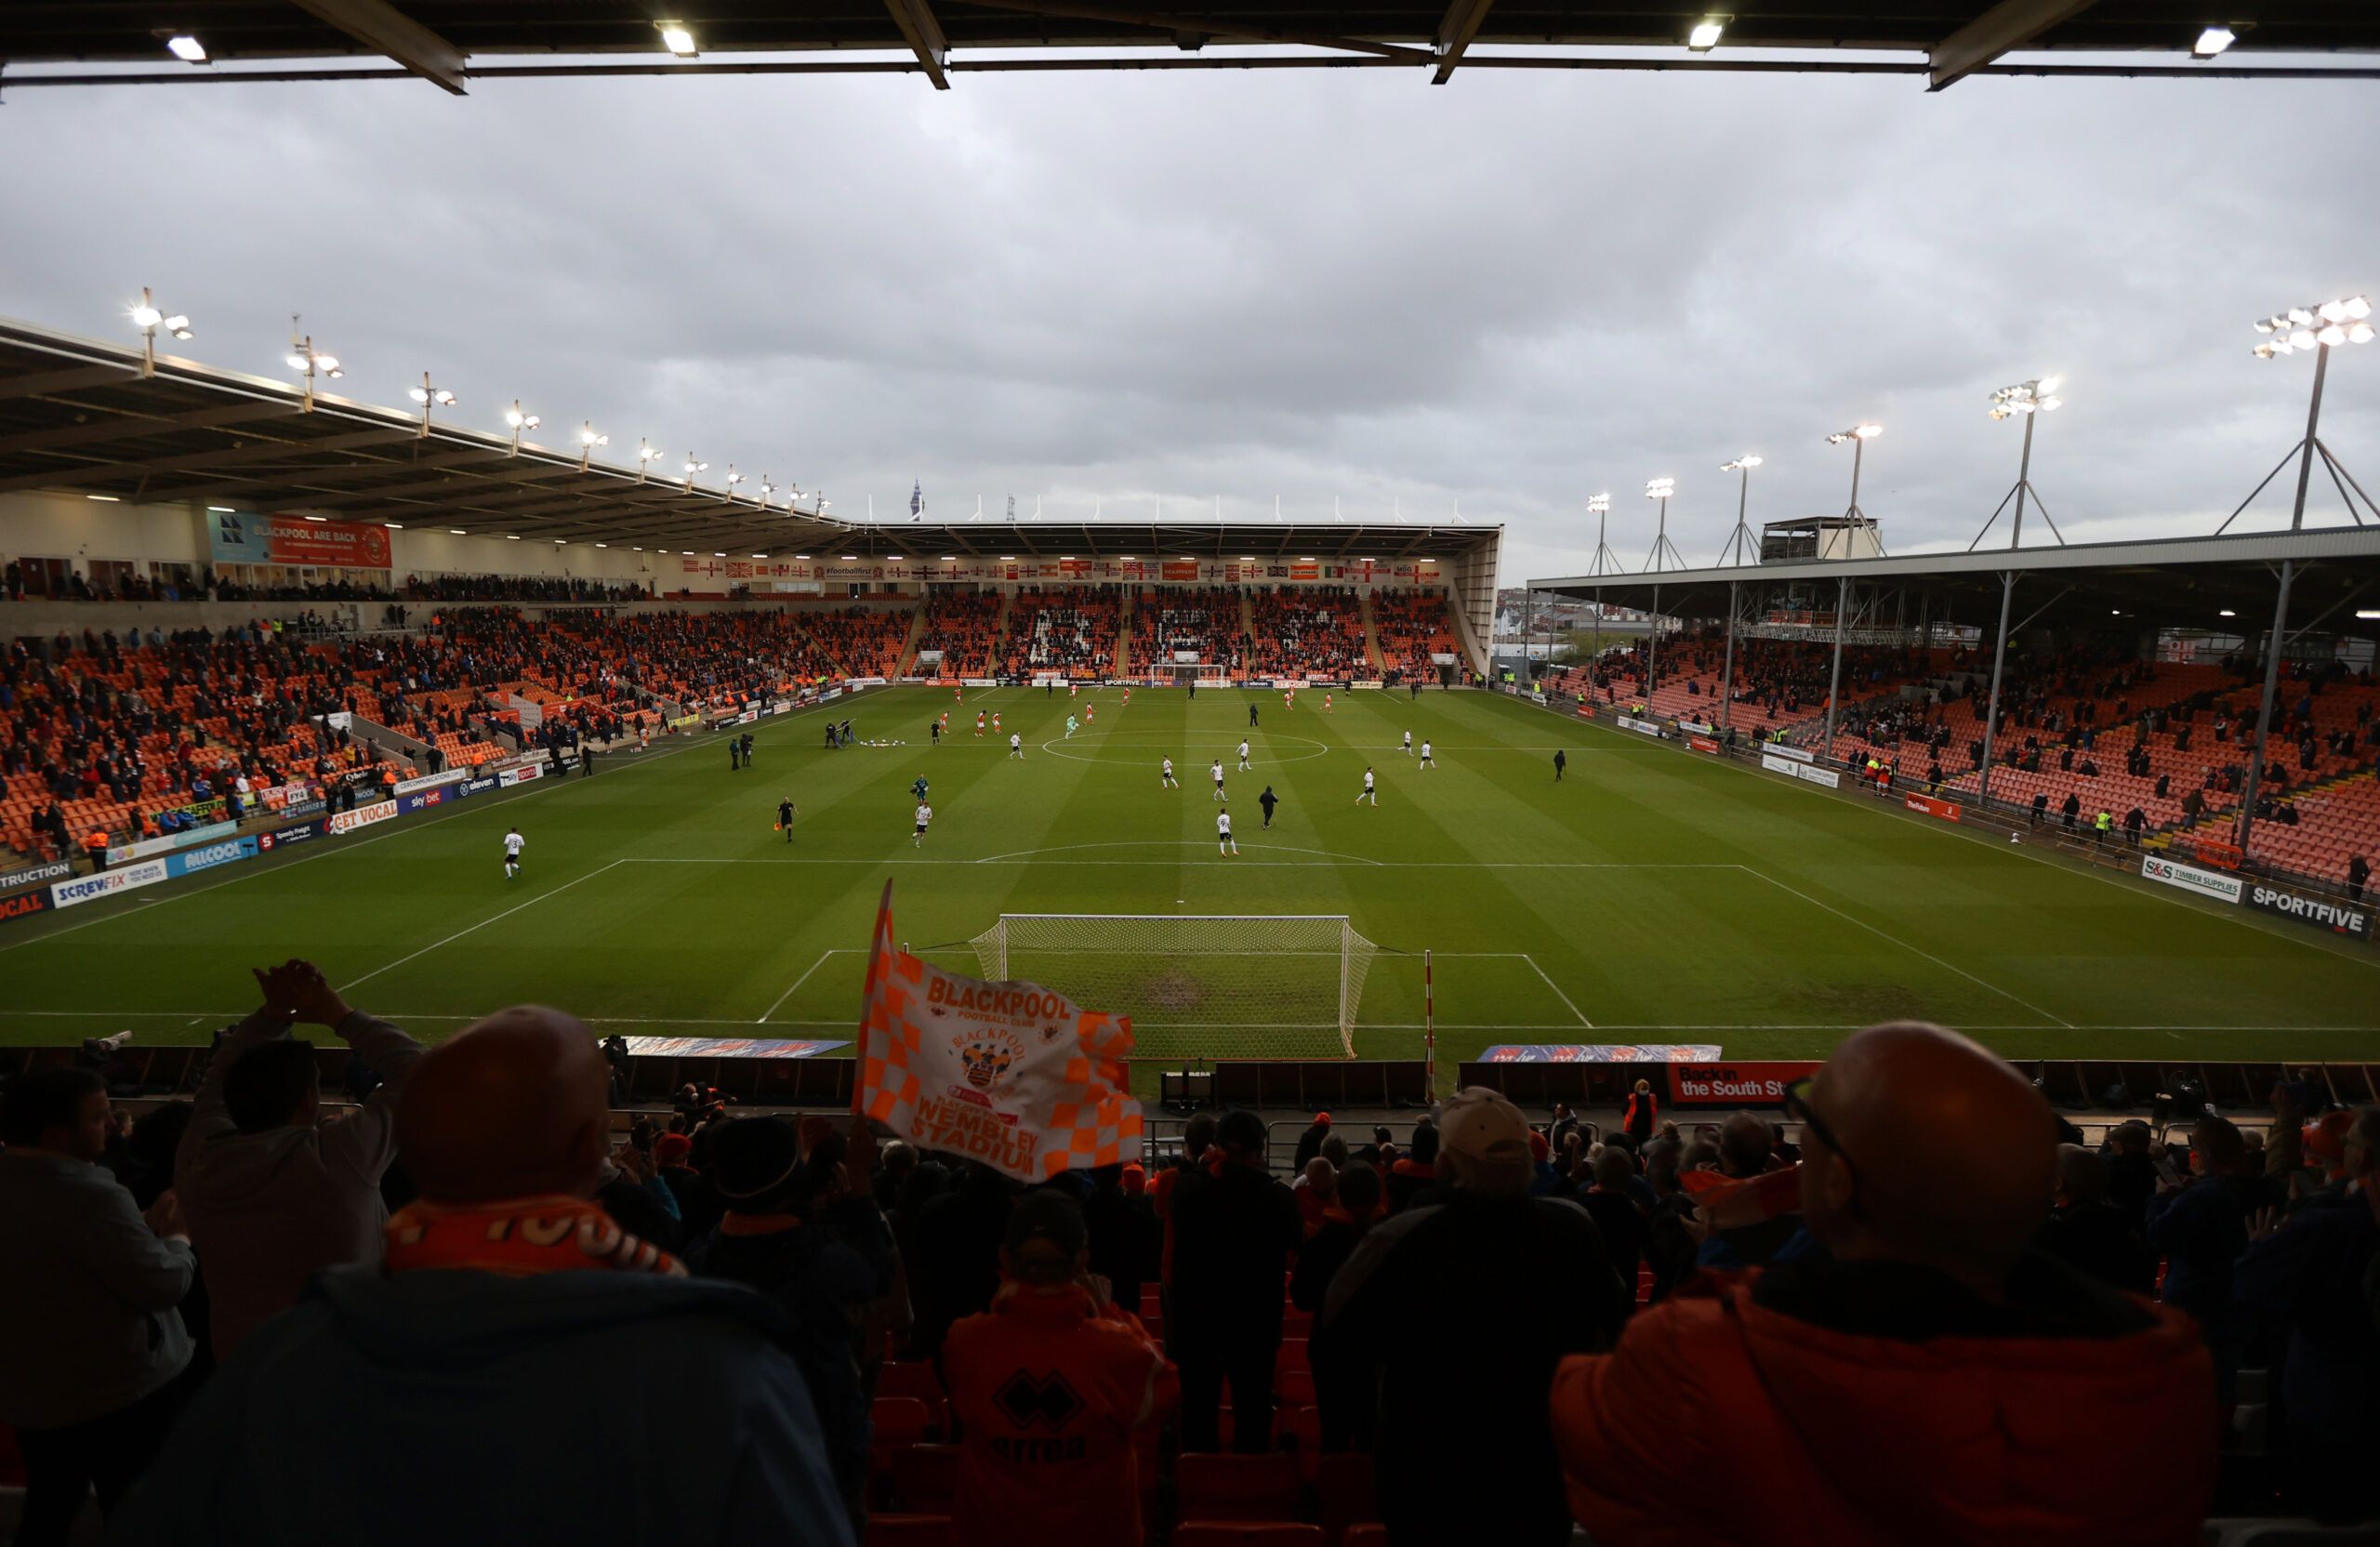 Soccer Football - League One Play-Off Semi Final Second Leg - Blackpool v Oxford United - Bloomfield Road Stadium, Blackpool, Britain - May 21, 2021 General view inside the stadium before the match, as a limited number of fans are permitted at outdoor sports venues Action Images/Molly Darlington EDITORIAL USE ONLY. No use with unauthorized audio, video, data, fixture lists, club/league logos or 'live' services. Online in-match use limited to 75 images, no video emulation. No use in betting, game